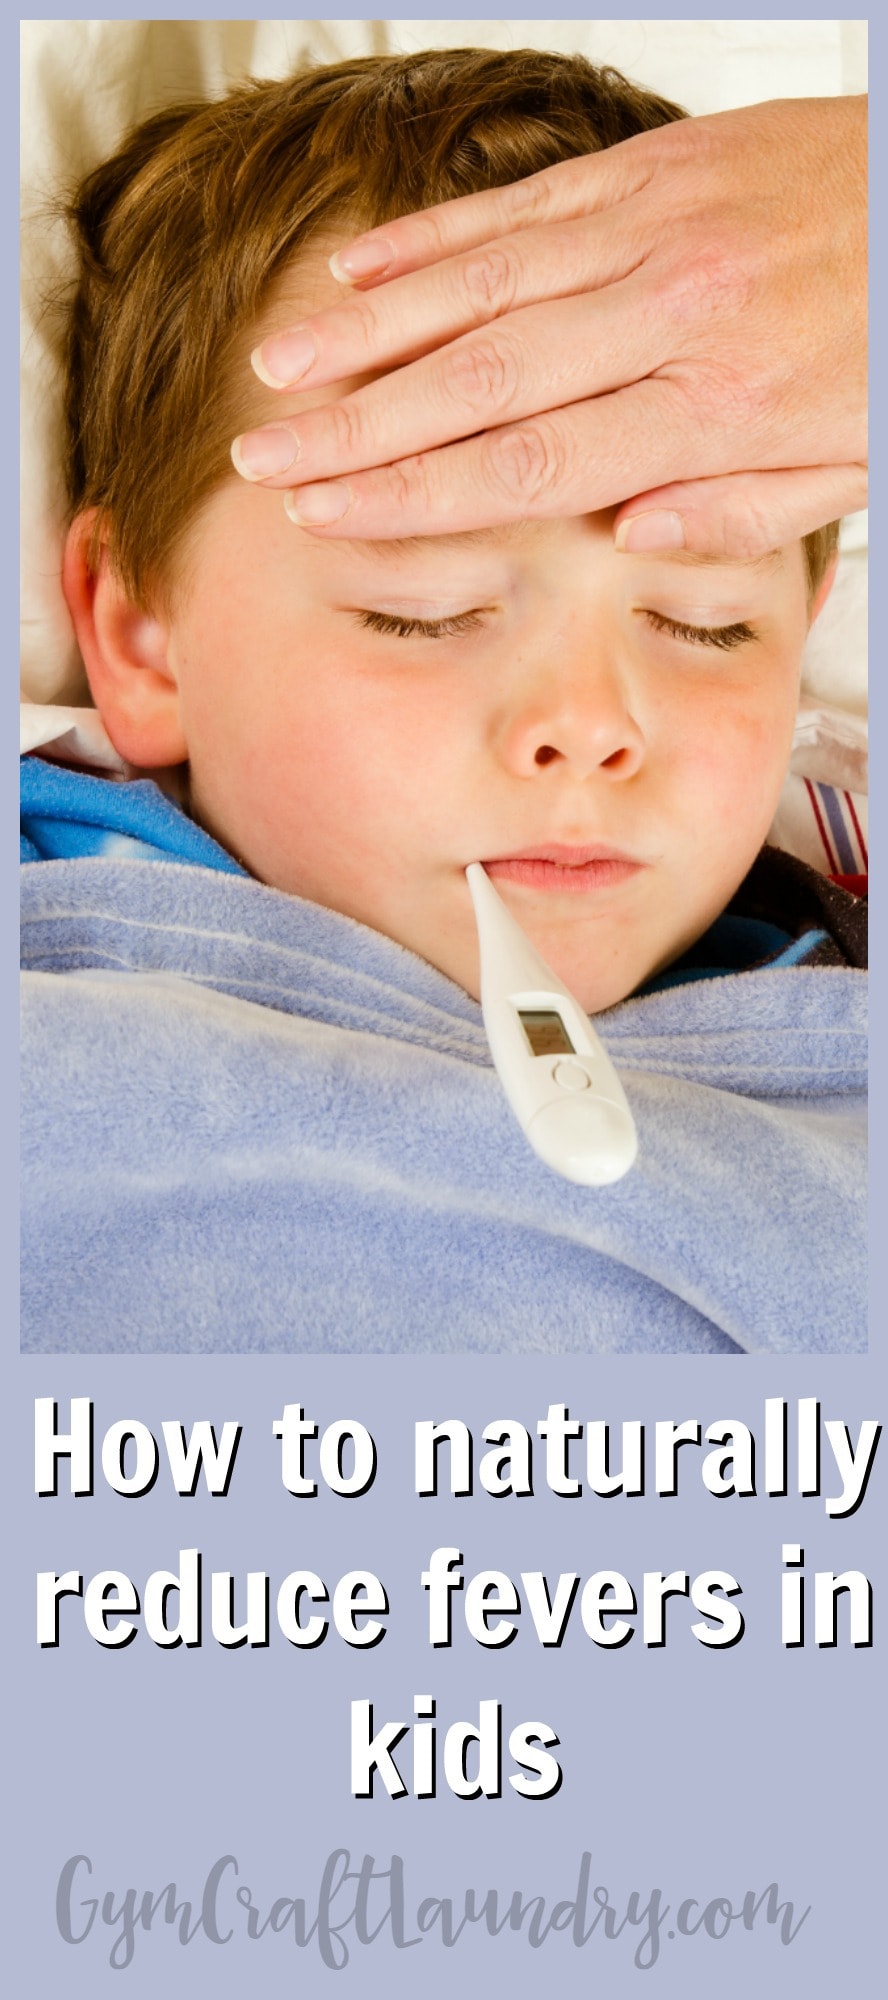 How to naturally reduce fevers in kids. Also, who my family calls online when we need a doctor.